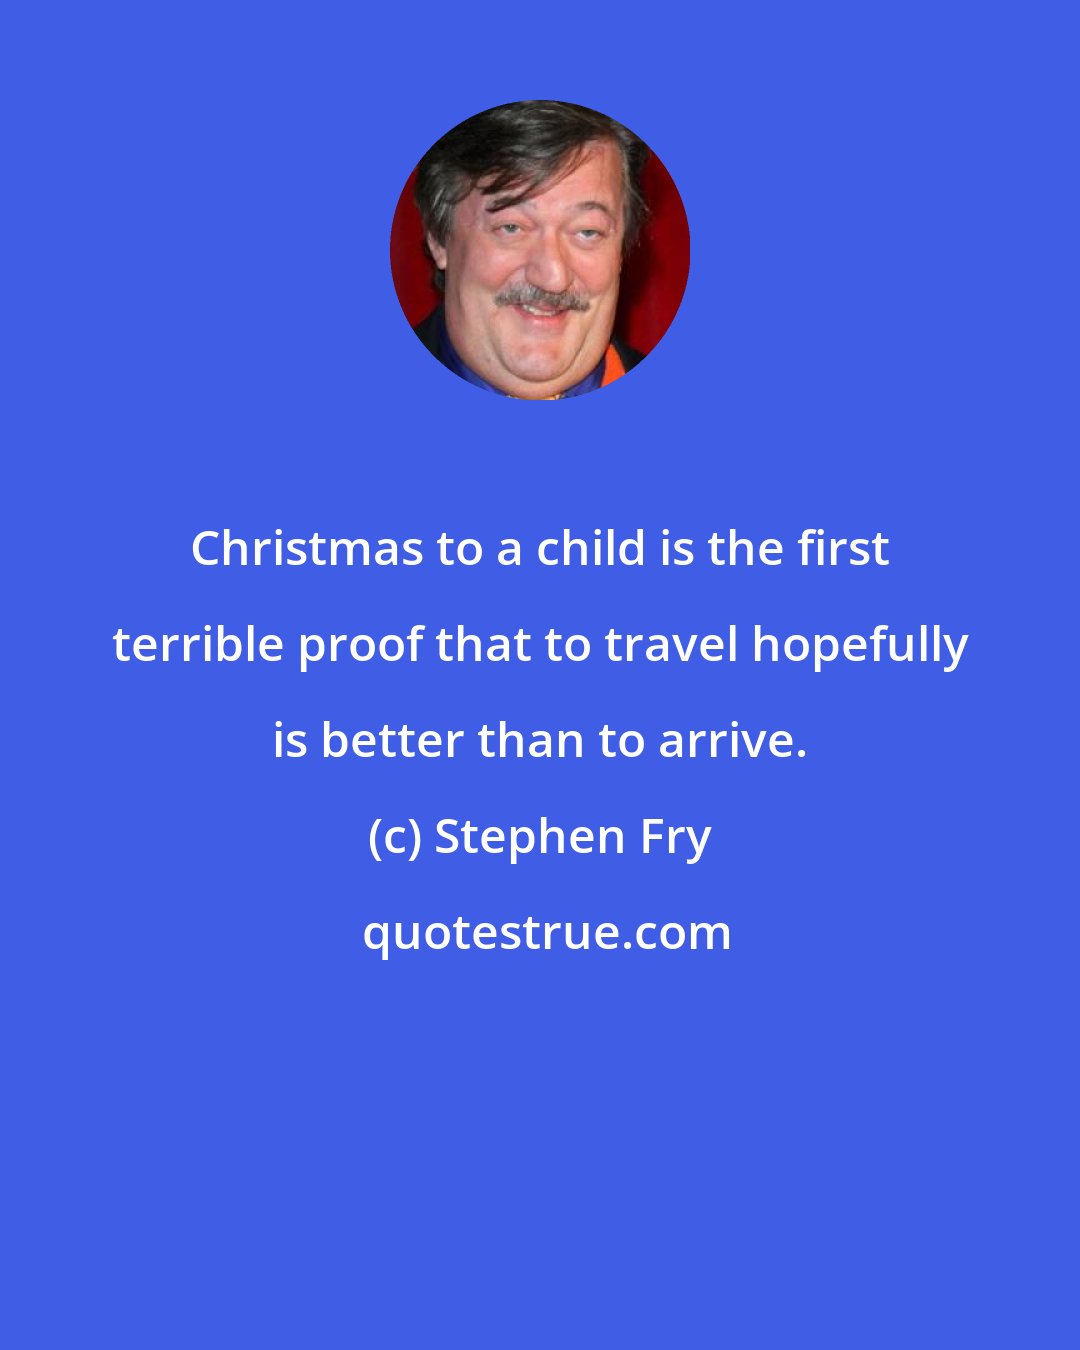 Stephen Fry: Christmas to a child is the first terrible proof that to travel hopefully is better than to arrive.